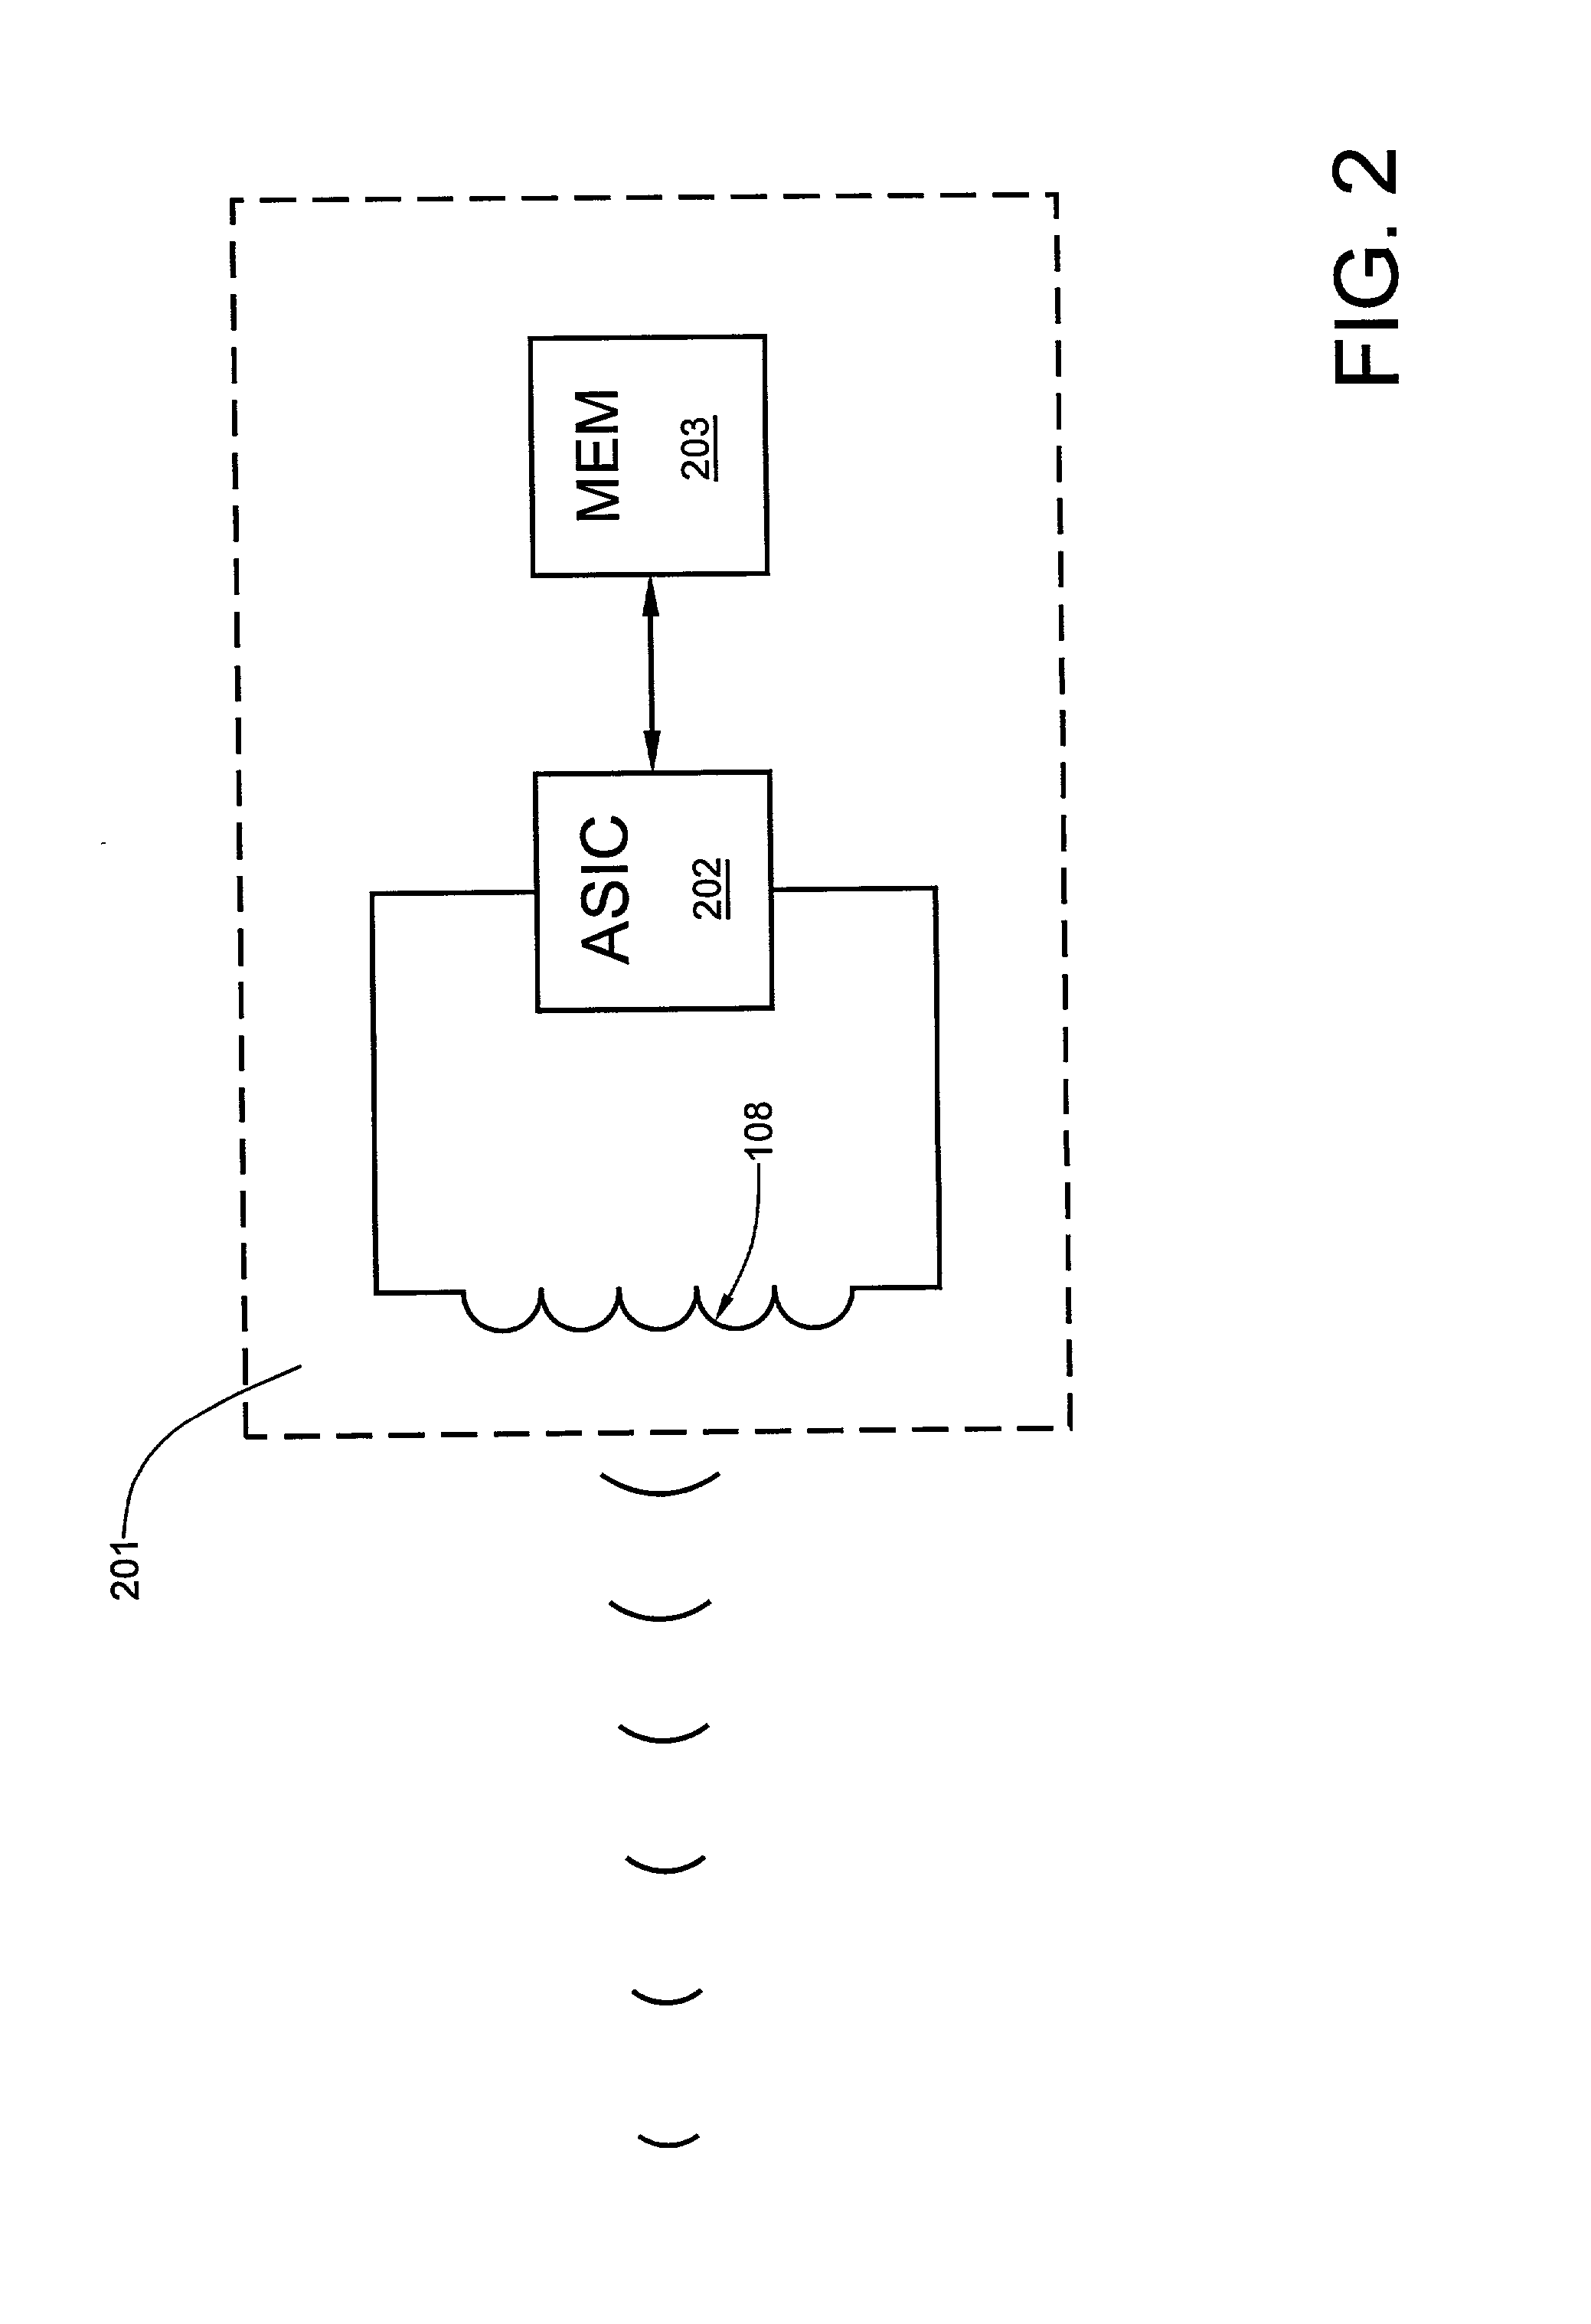 Radio frequency patient identification and information system